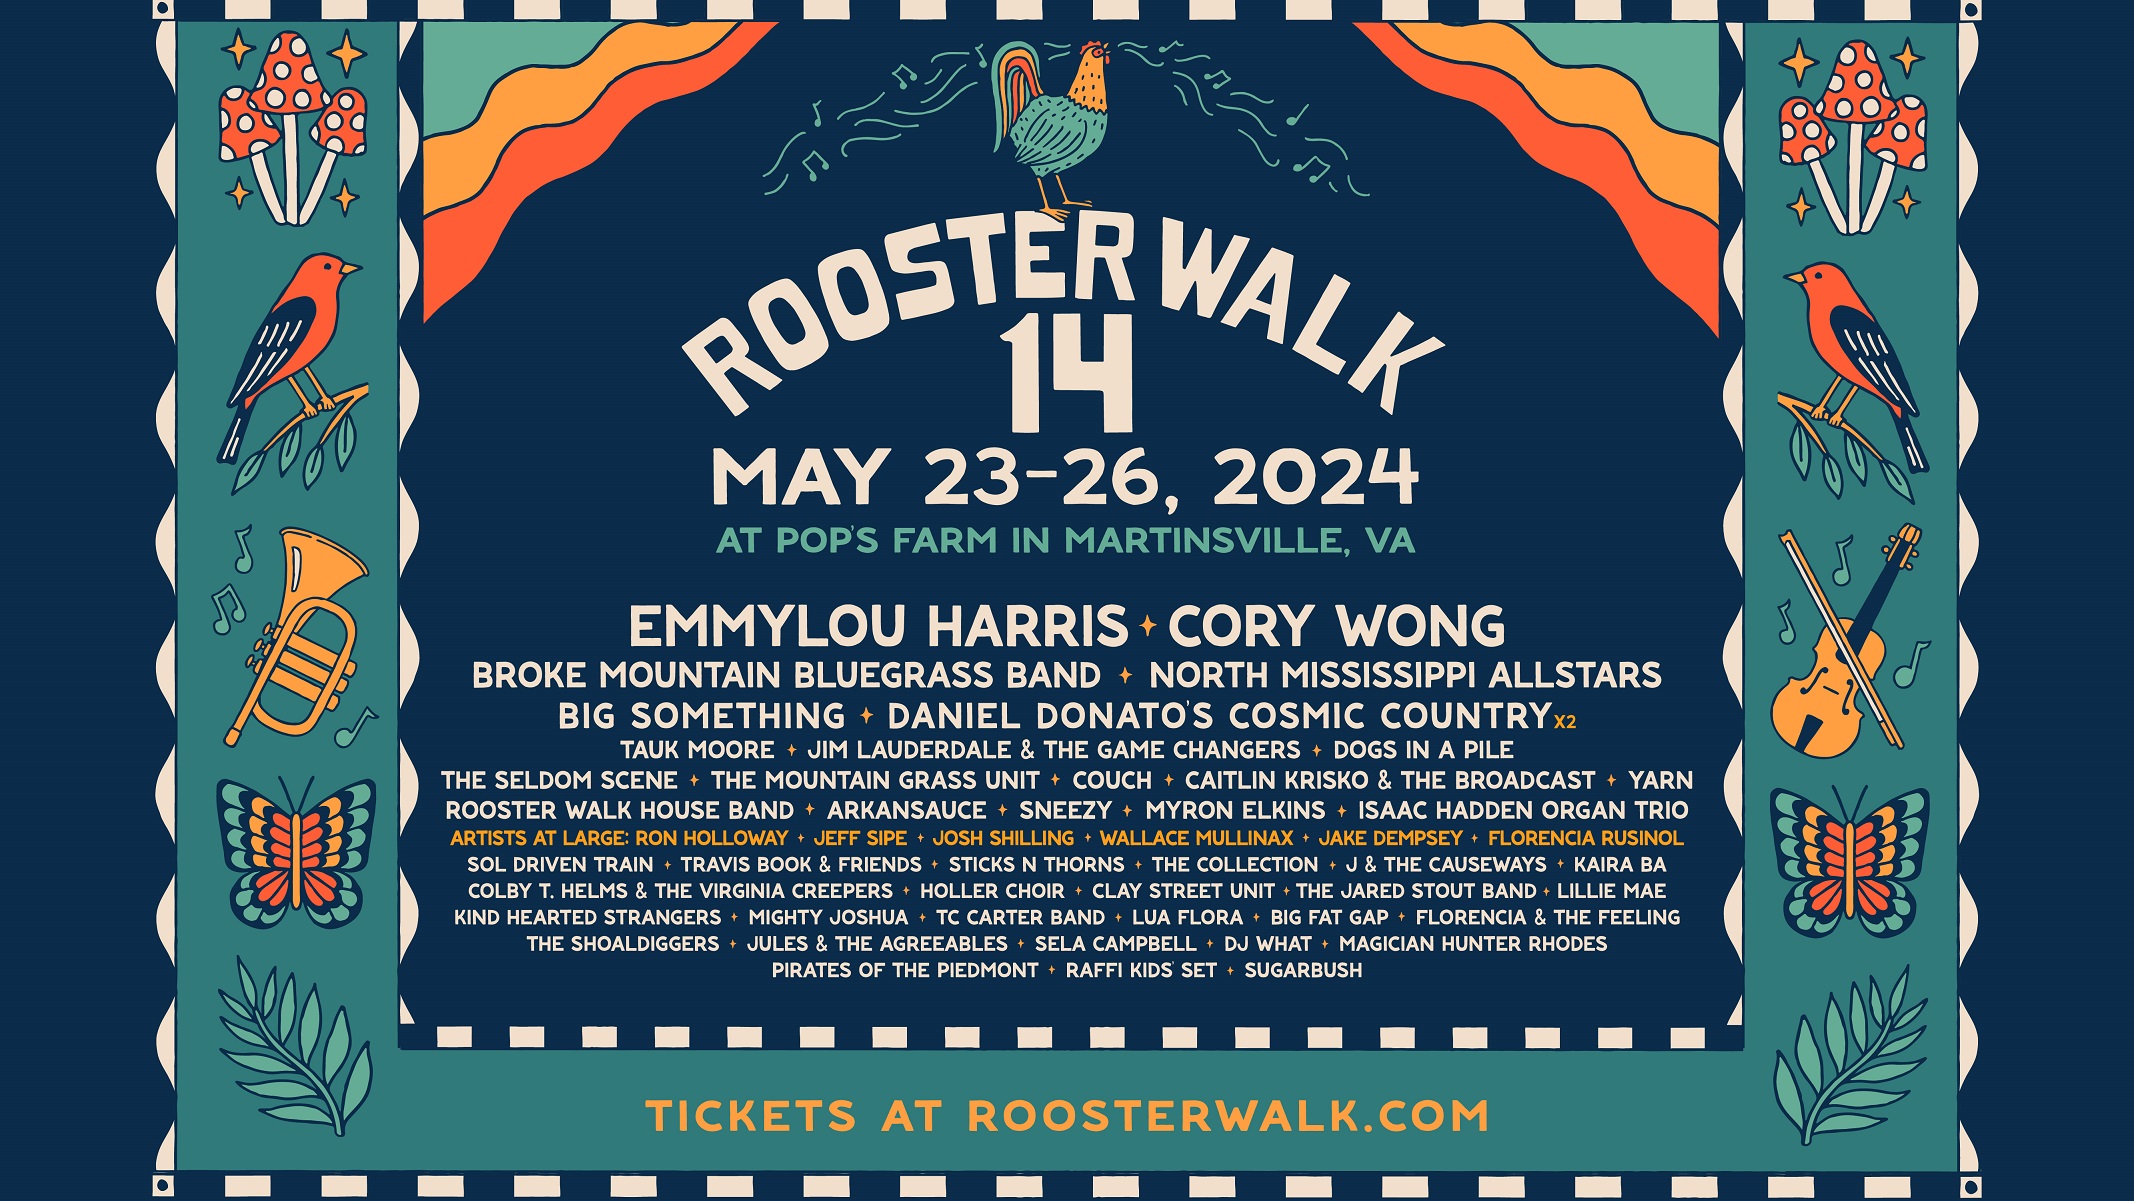 North Mississippi Allstars, BIG Something top final band additions to Rooster Walk 14 lineup